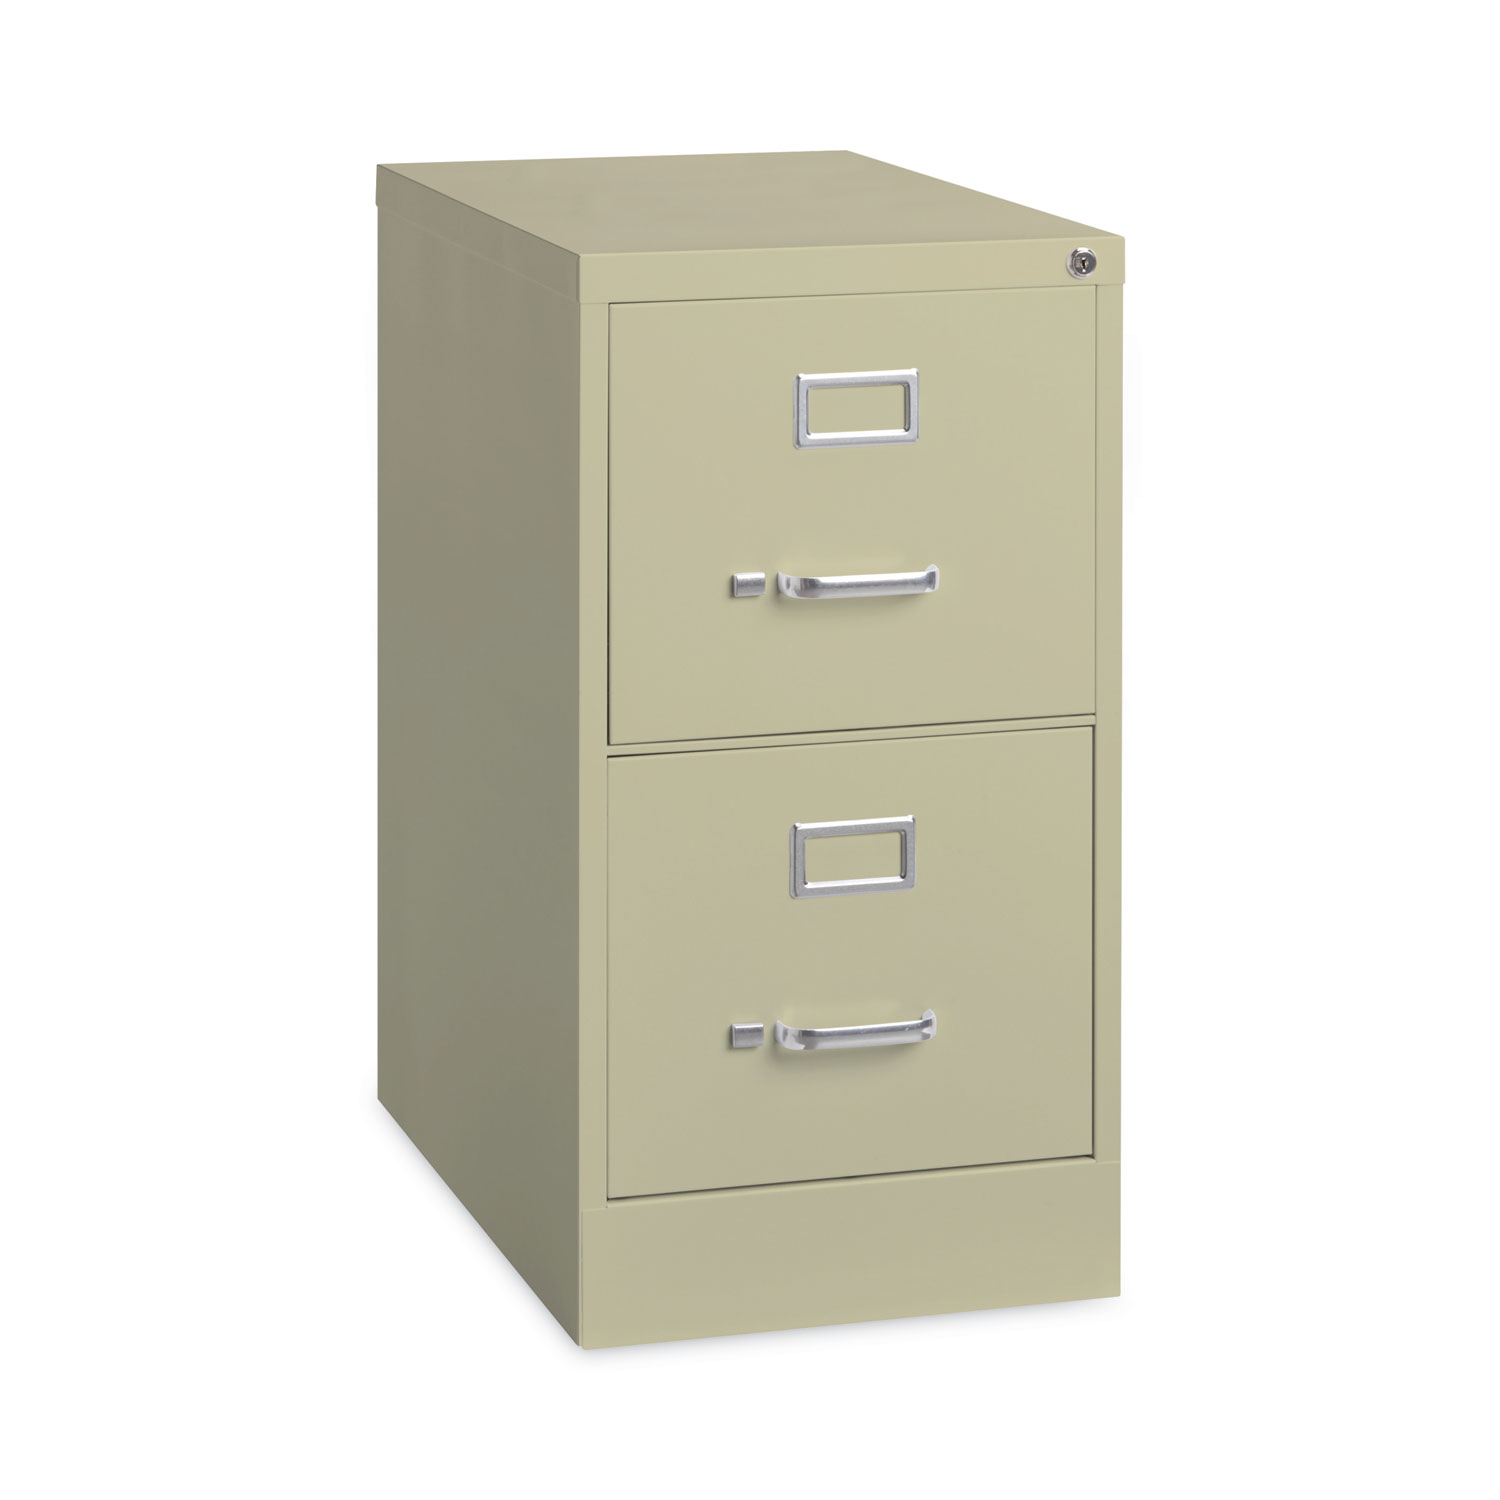 Vertical Letter File Cabinet, 2 Letter-Size File Drawers, Putty, 15 x 22 x  28.37 - itemsrus